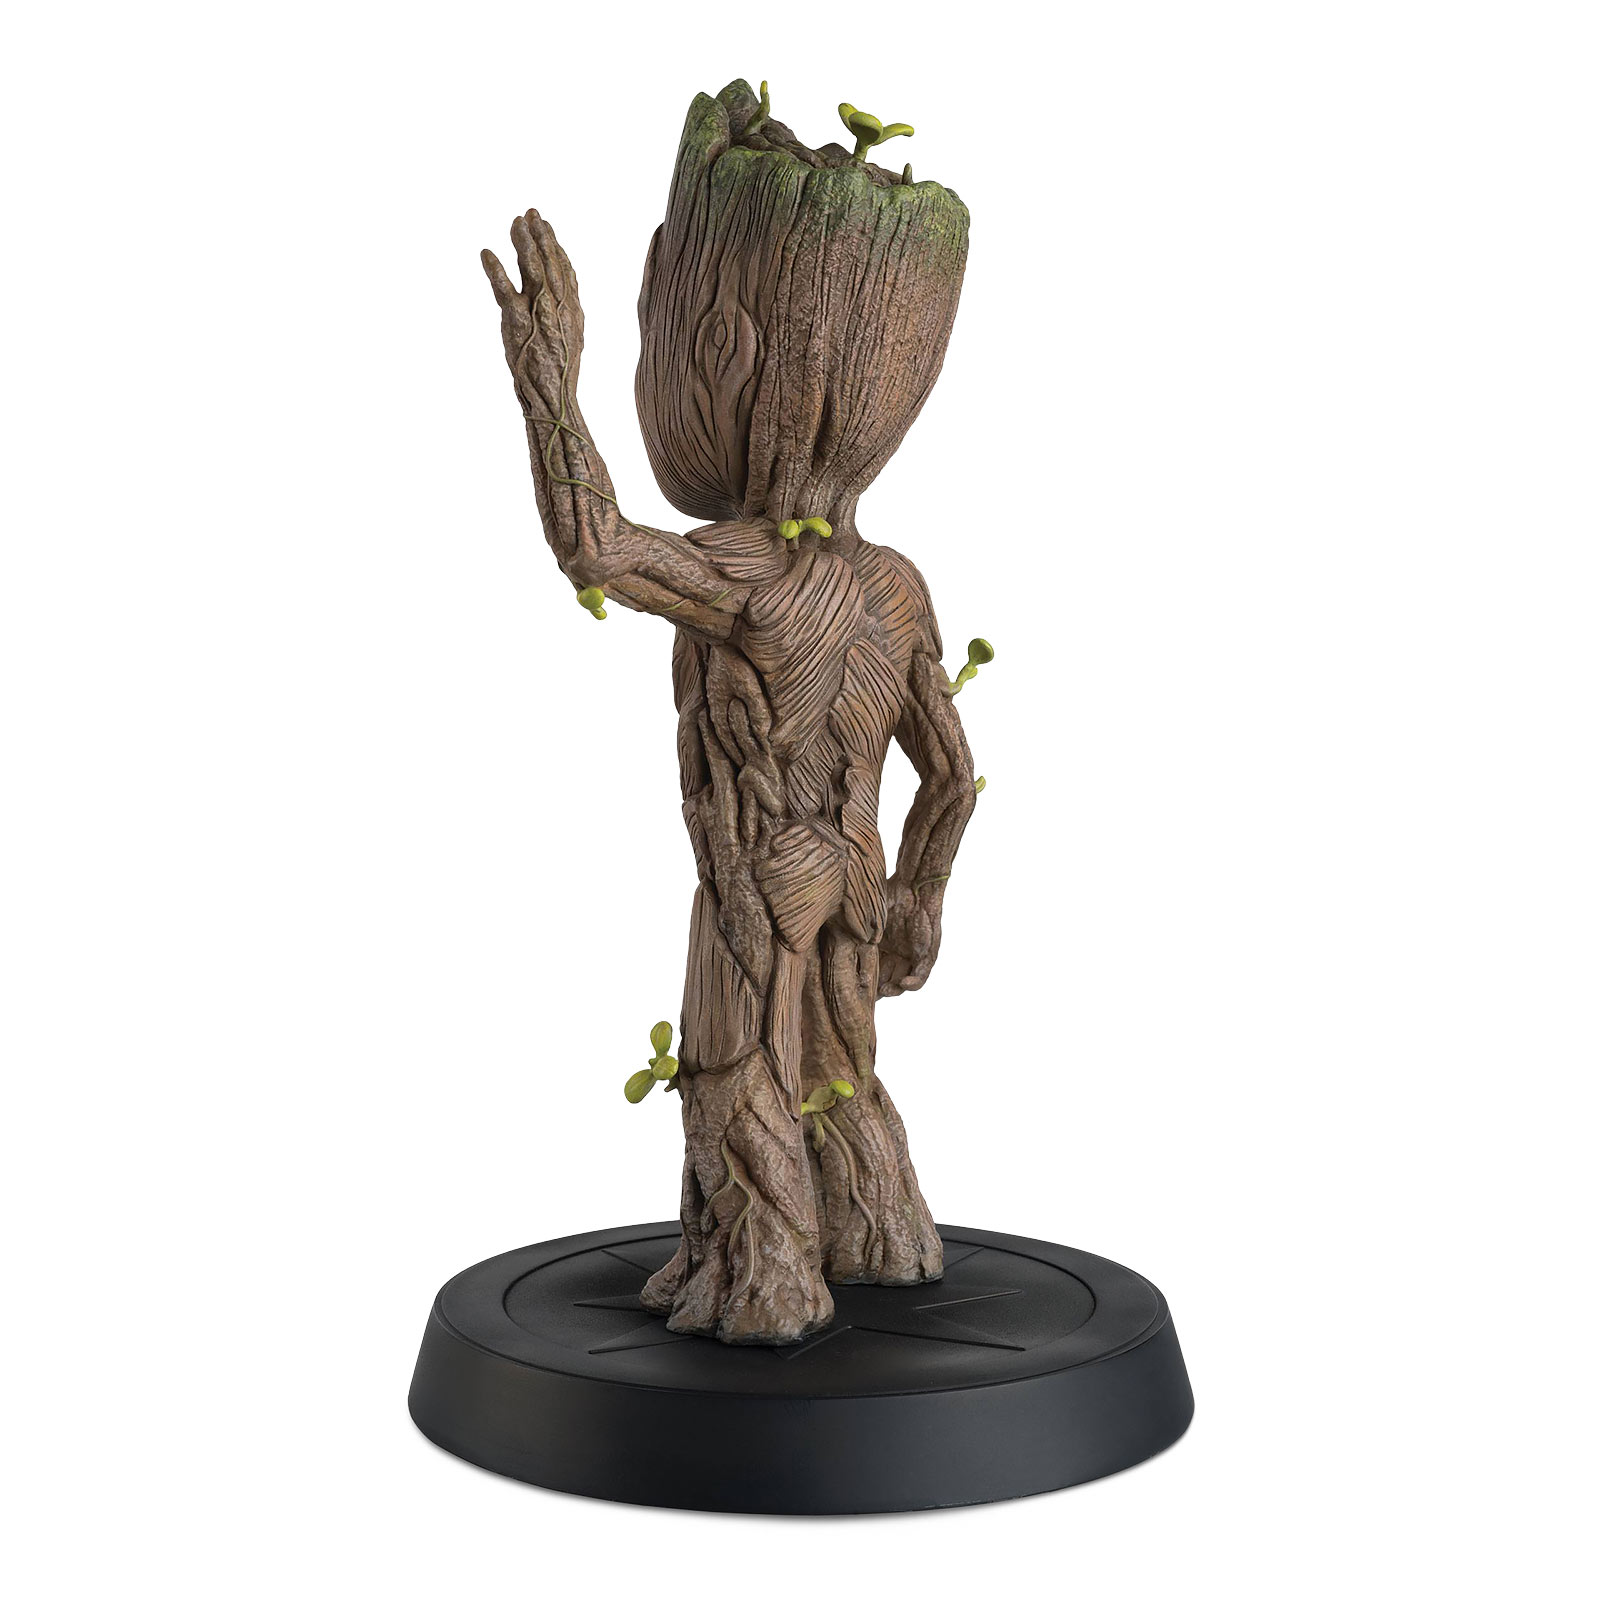 Guardians of the Galaxy - Groot Movie MEGA Collection Figur 28 cm